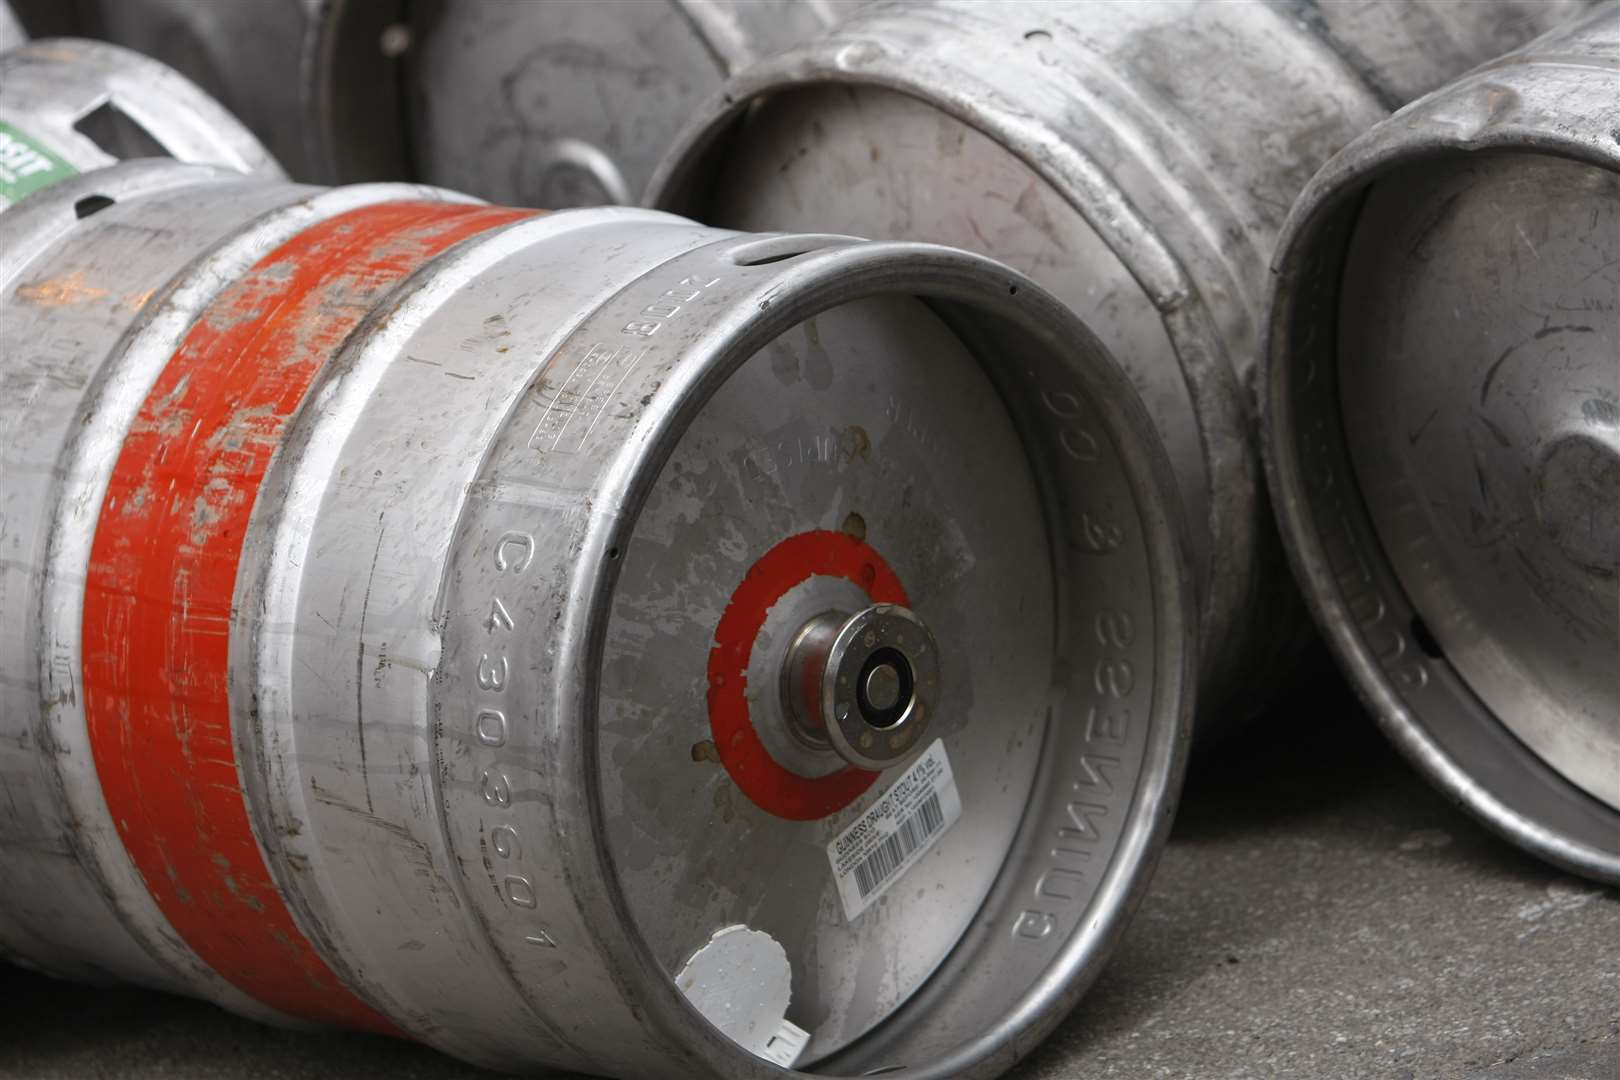 Beer barrels have often proved challenging to get hold of